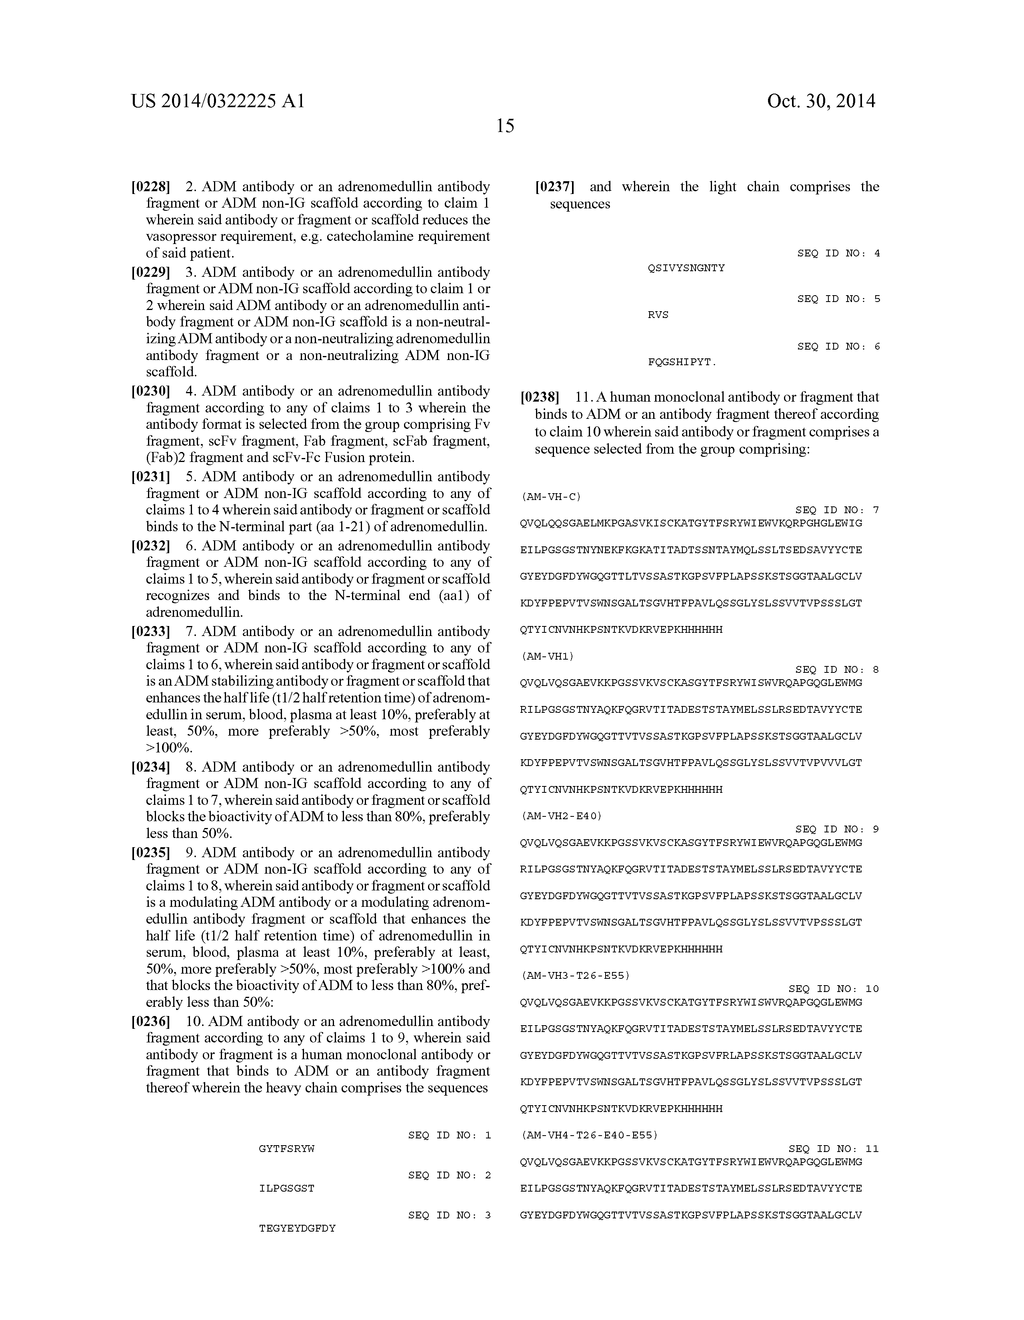 Anti-Adrenomedullin (ADM) antibody or anti-ADM antibody fragment or     anti-ADM non-Ig scaffold for use in therapy of an acute disease or acute     condition of a patient for stabilizing the circulation - diagram, schematic, and image 40